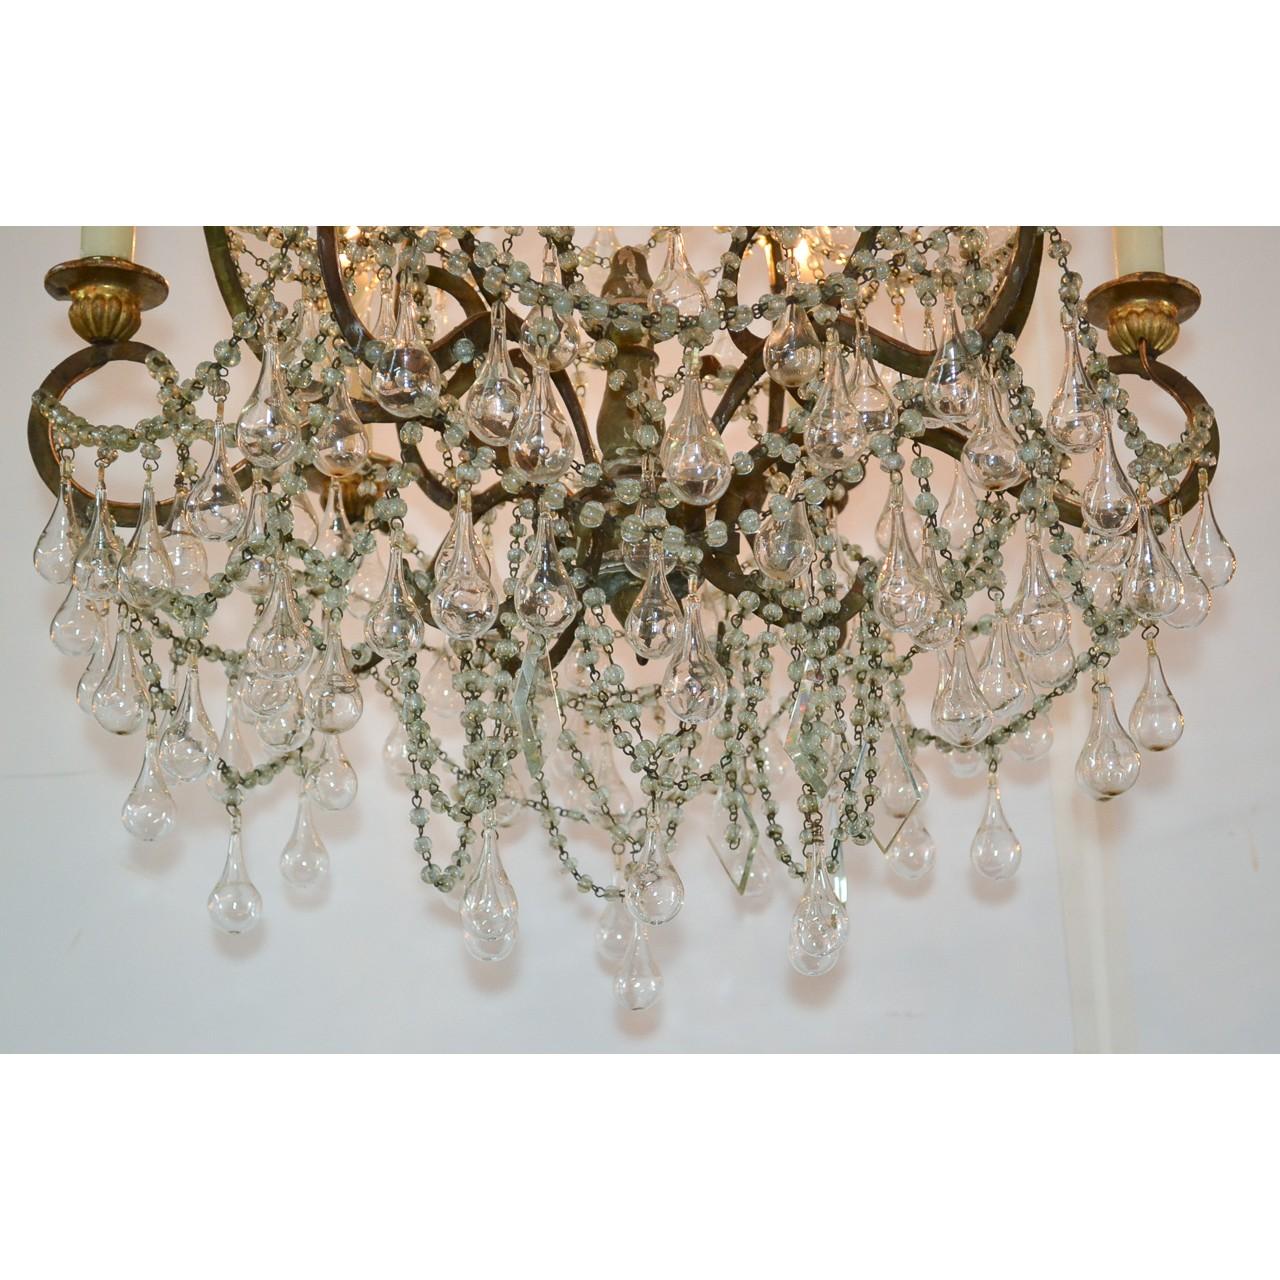 Very elegant 18th century French chandelier with elaborately scrolled gilt bronze arms draped with cascades of cut crystal beads. Accented overall with superb blown glass teardrops. Beautiful foliate motif bronze candle cups,

circa 1780.